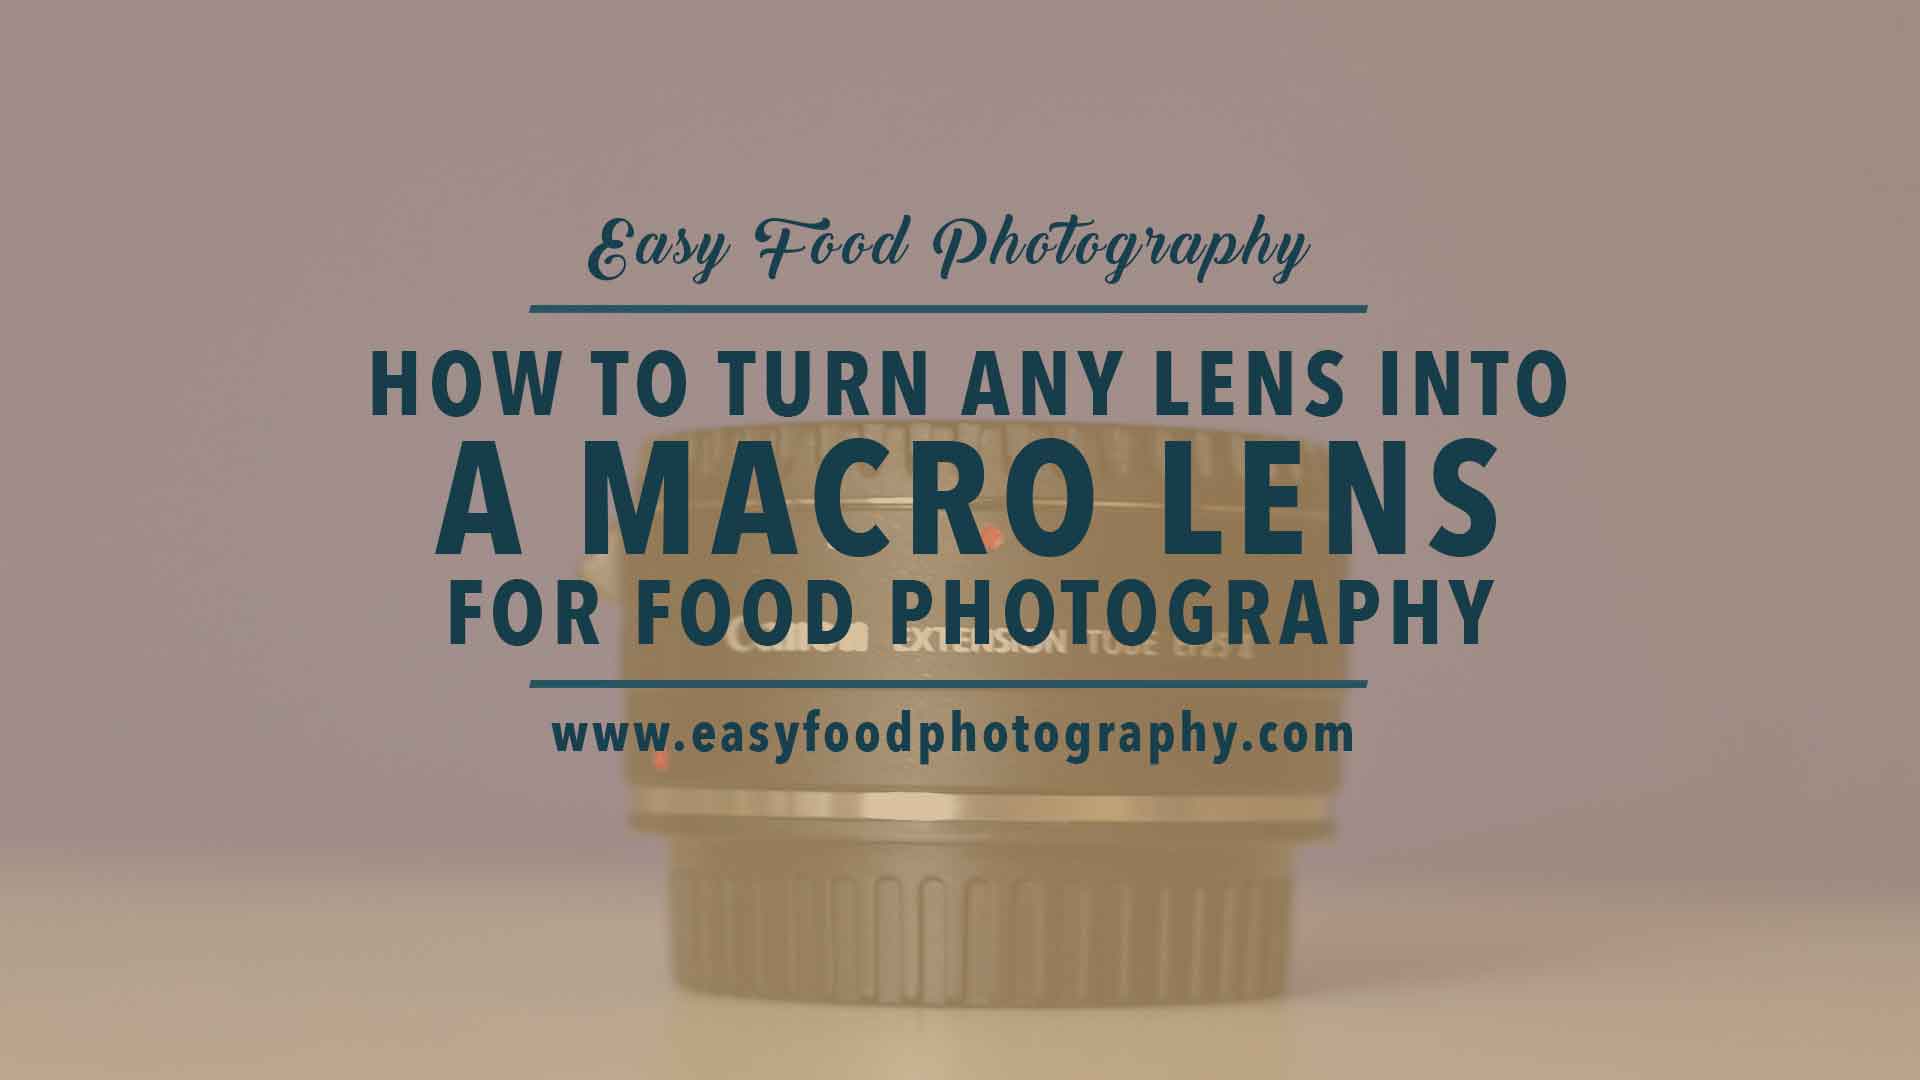 How to make any lens into a macro lens for food photography